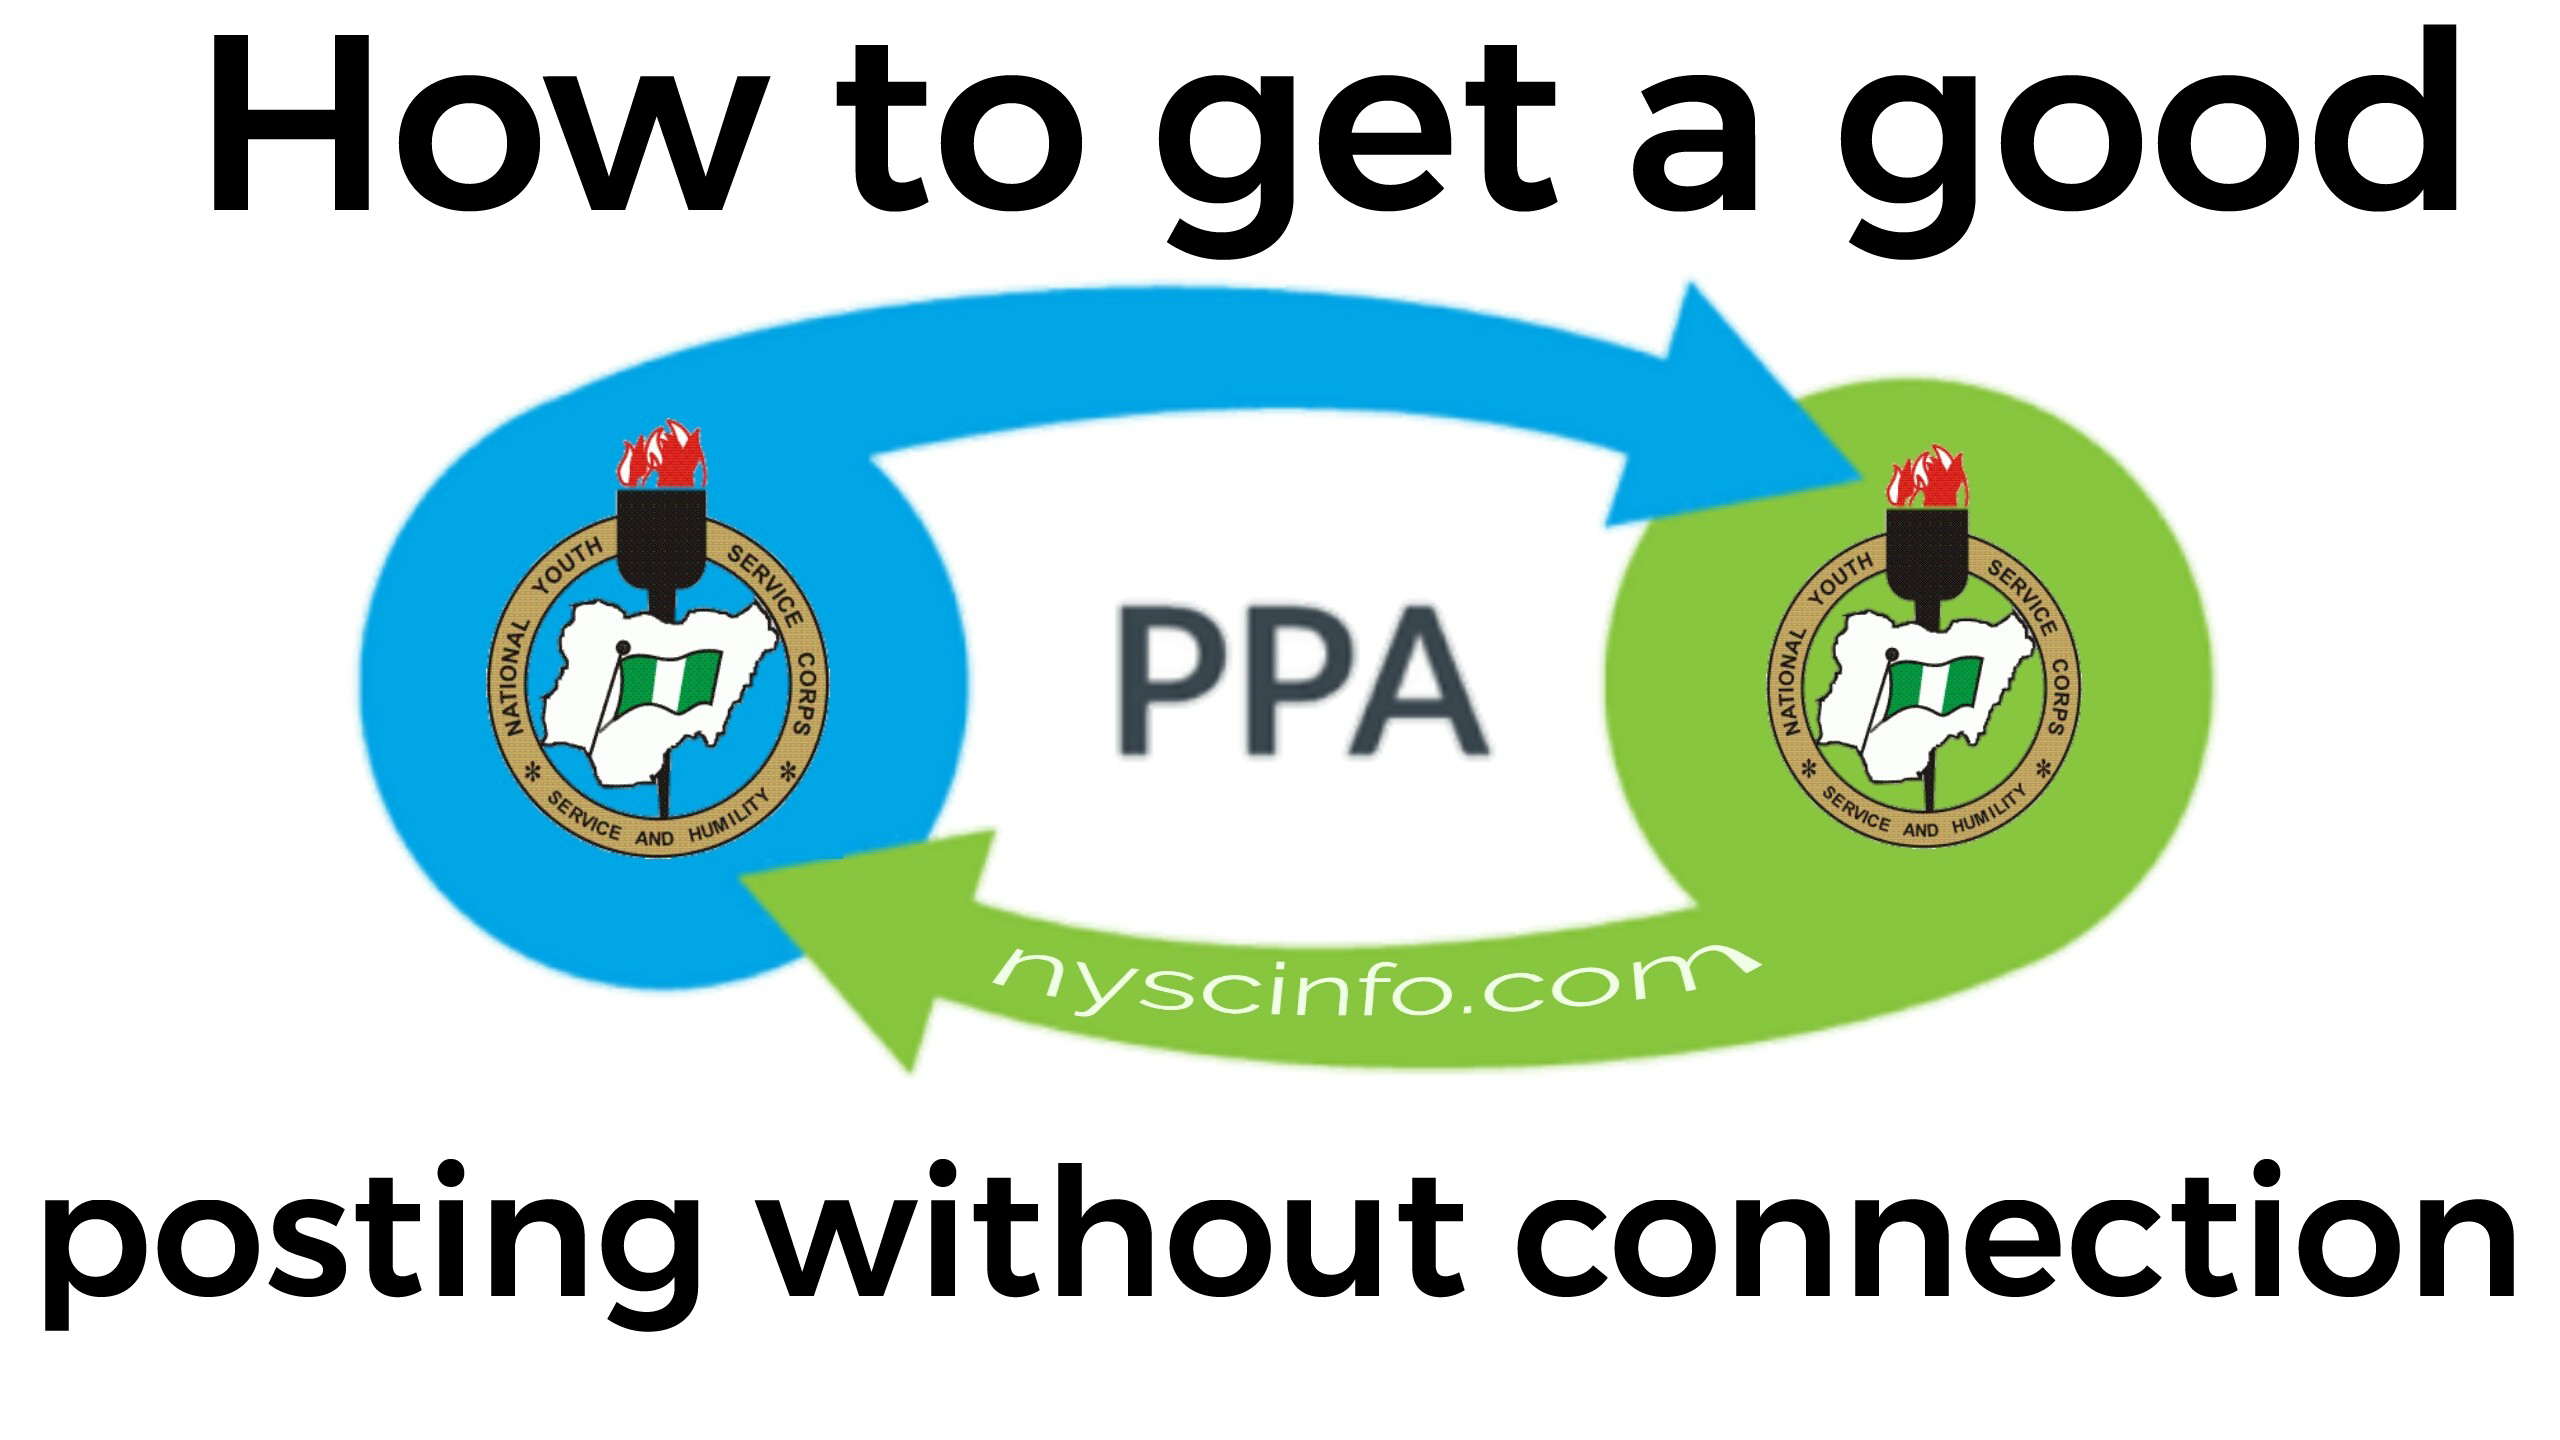 How to get a good PPA posting without connection